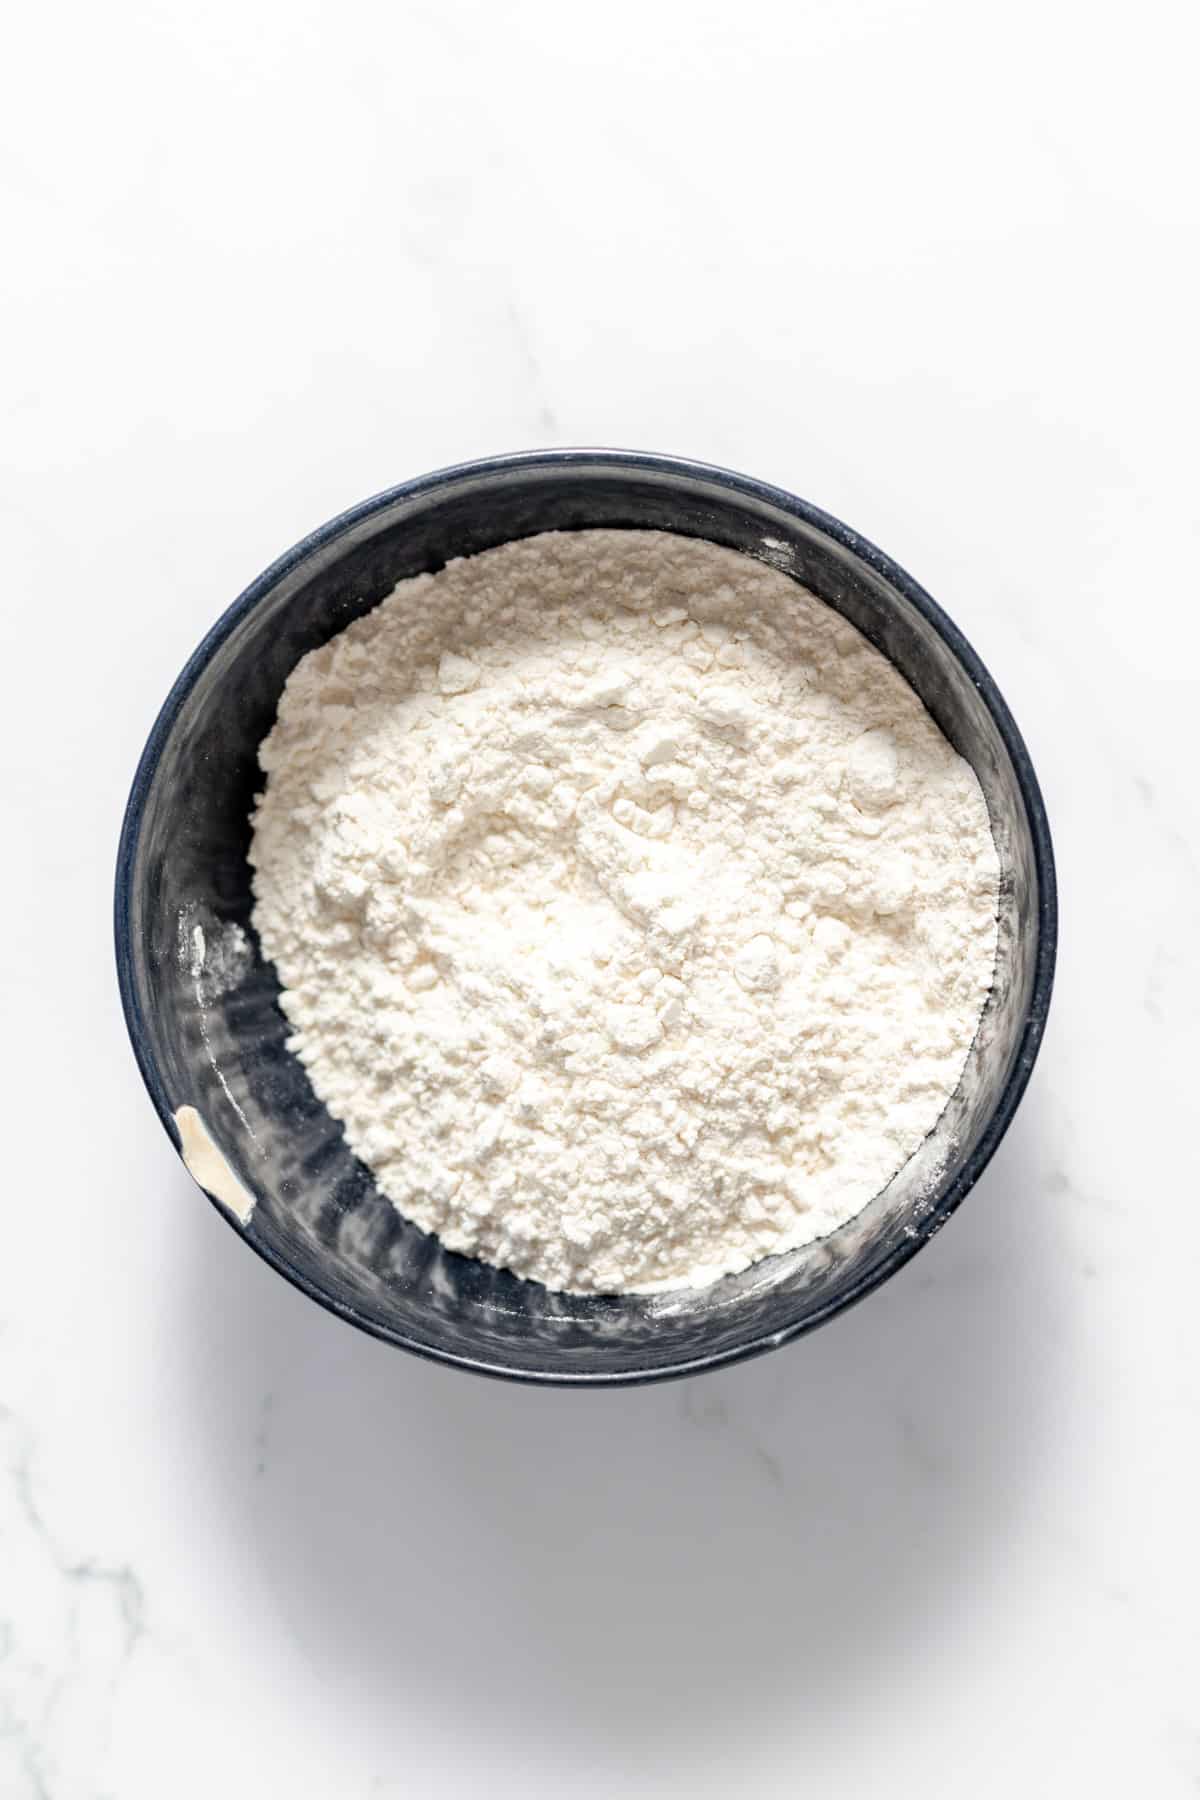 A mixing bowl with all-purpose flour, salt, and baking soda in it.